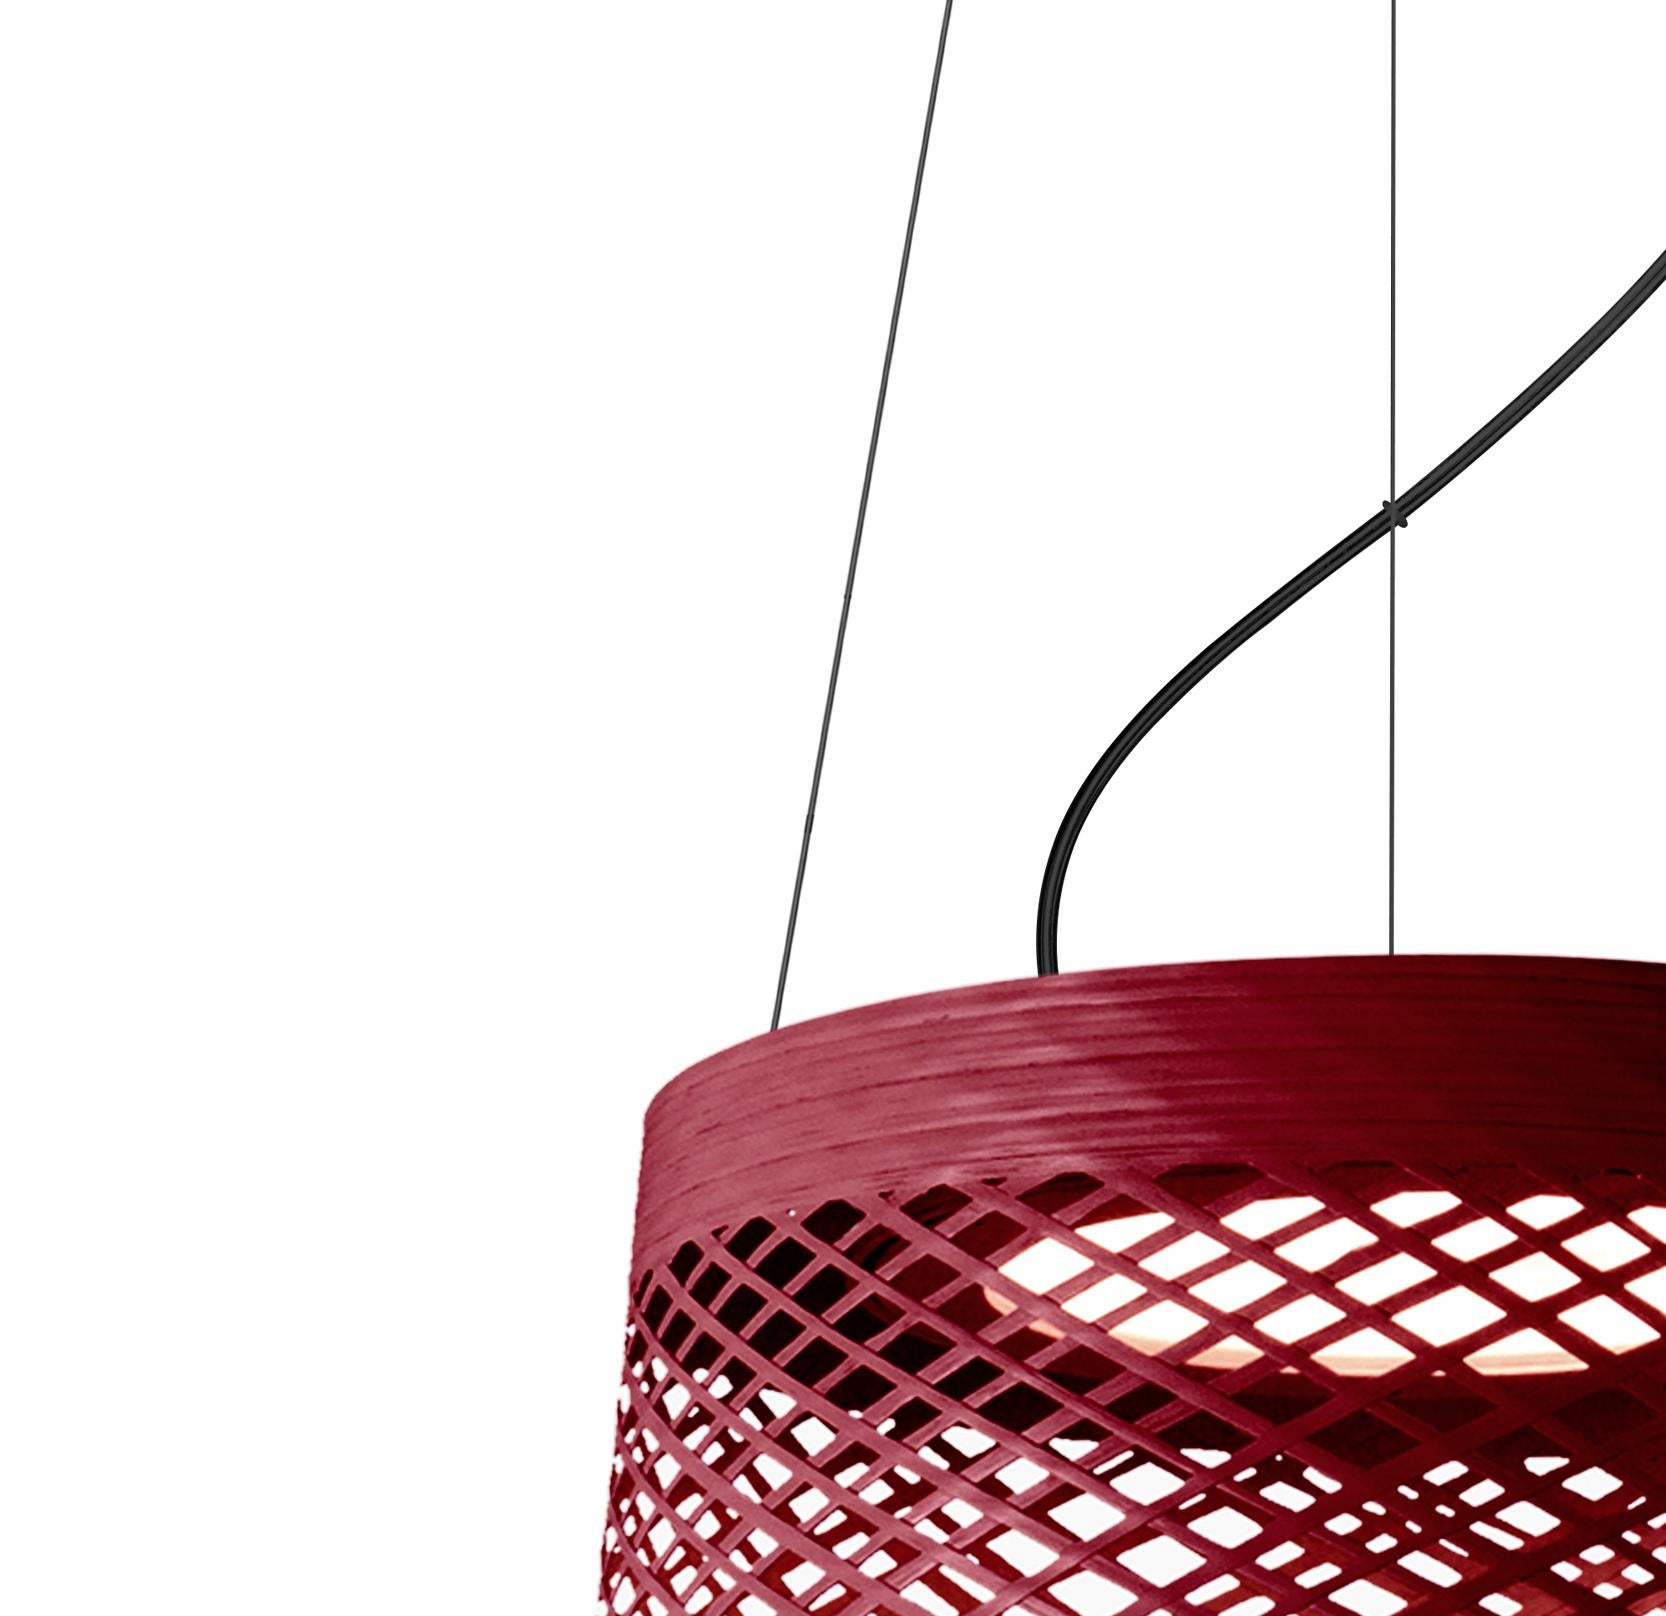 A lamp-icon in its outdoor version. Based on the image of a fishing rod as it curves, Twiggy Grid embodies its flexibility, clarity and strength, gathering them into an object with a vivid personality.

Materials:
Coated fiberglass-based